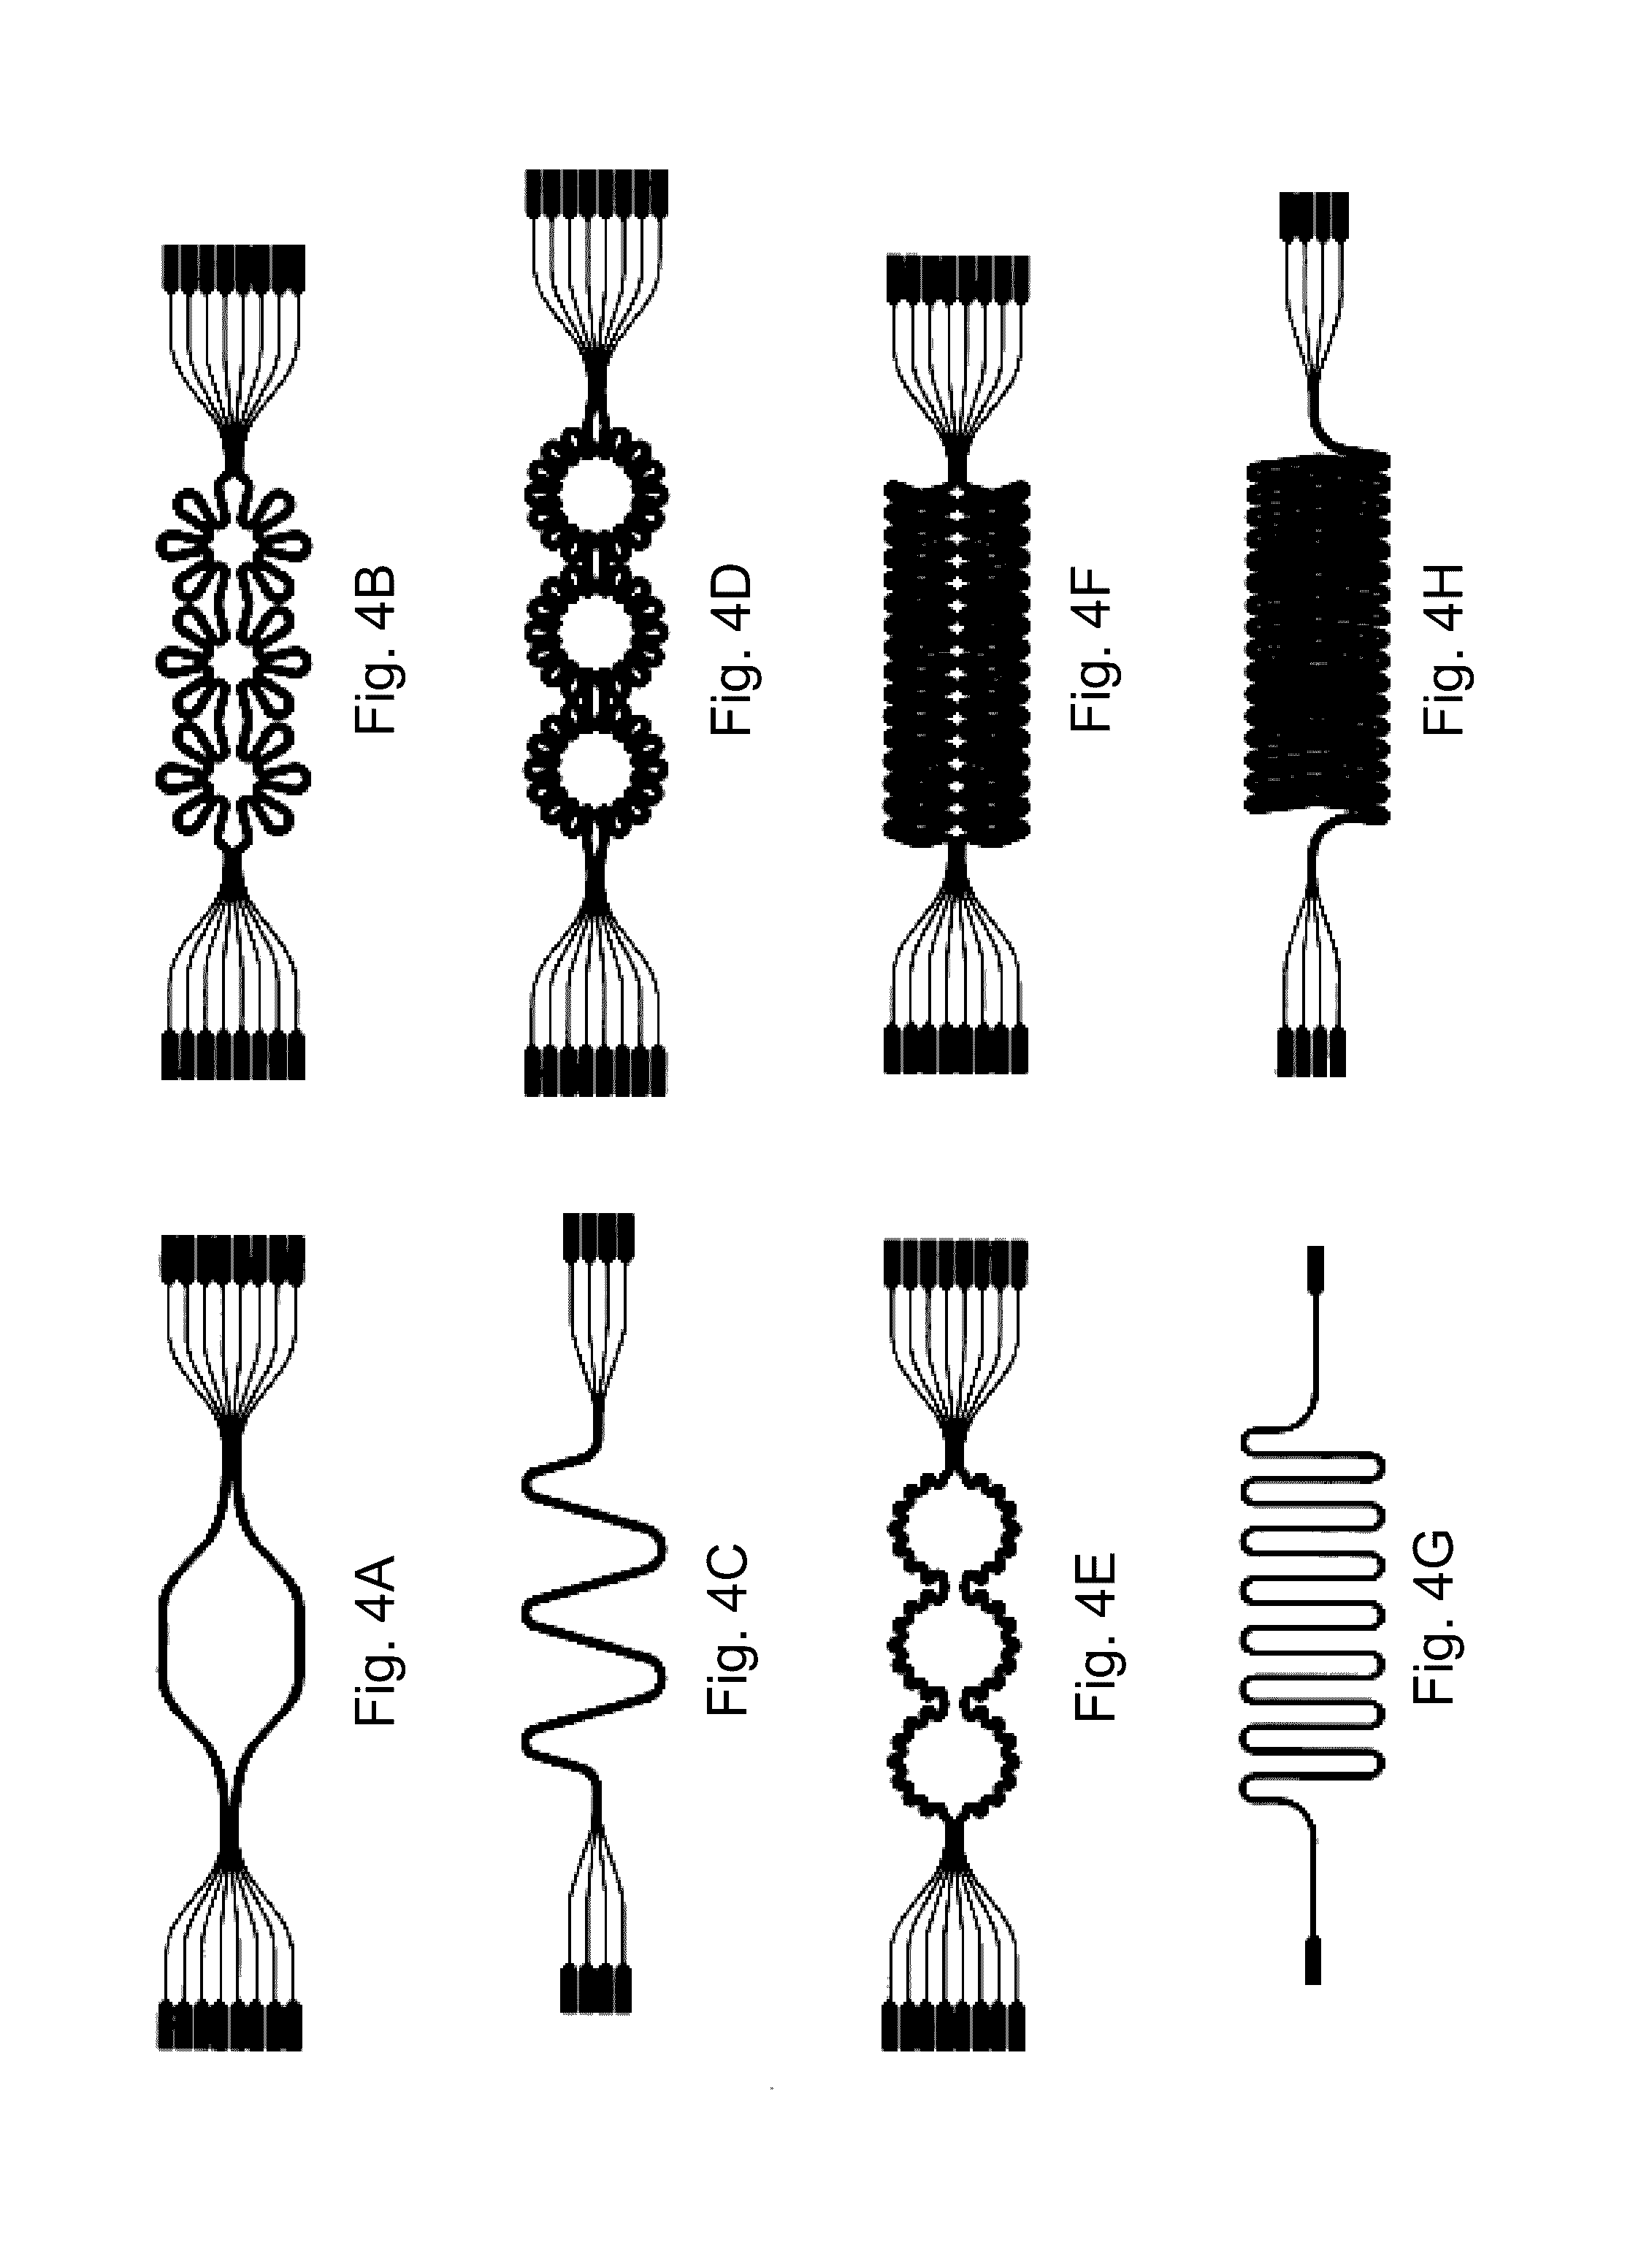 Stretchable conductor design and methods of making